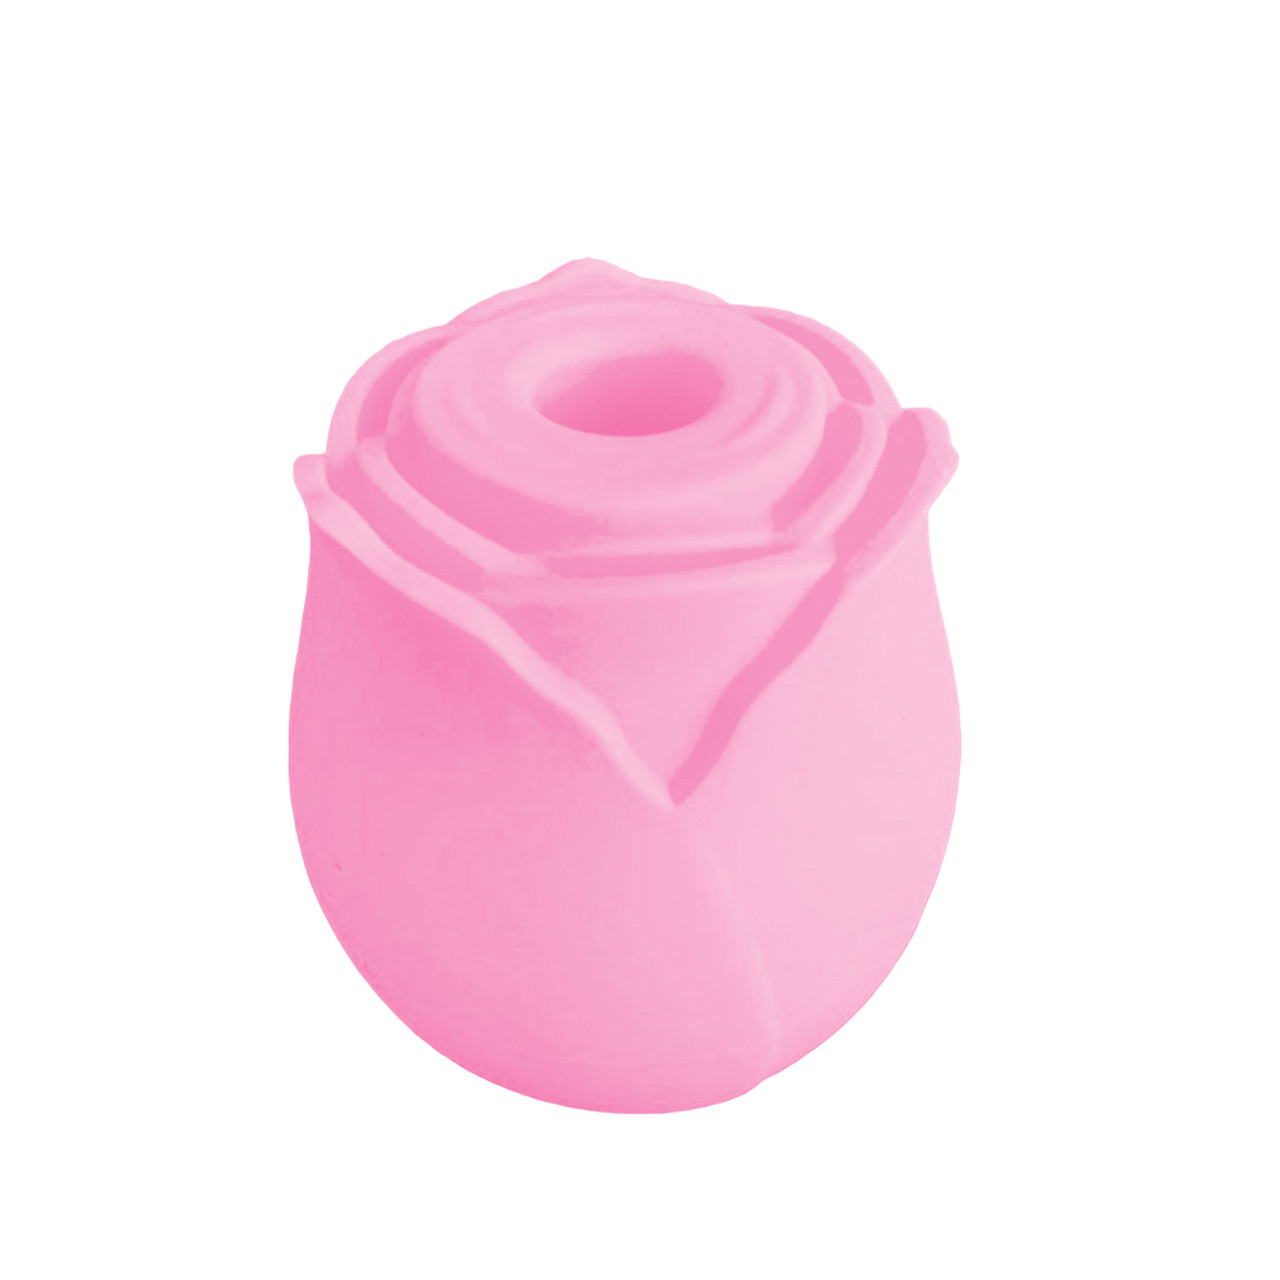 https://cdn11.bigcommerce.com/s-rph88/images/stencil/1280x1280/products/24876/237233/sucking-pink-rose-10-function-rechargeable-silicone-flower-shaped-suction-vibrator-6__75068.1645208677.jpg?c=2